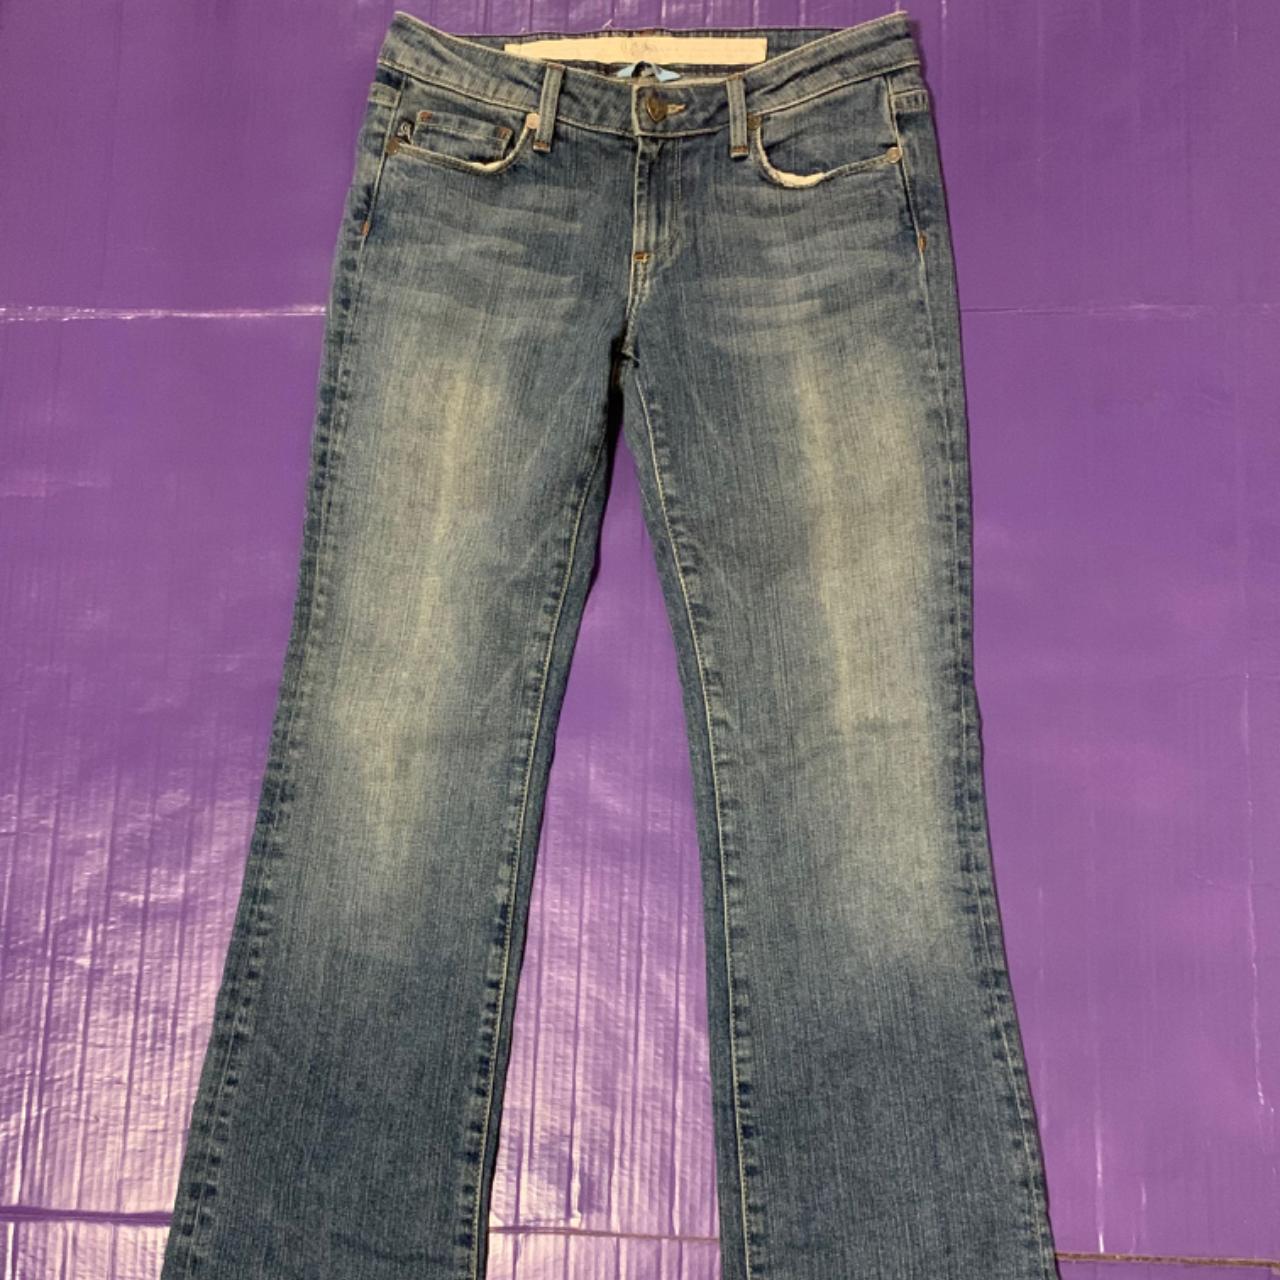 City of angels jeans. Low rise and bootcut. In great... - Depop